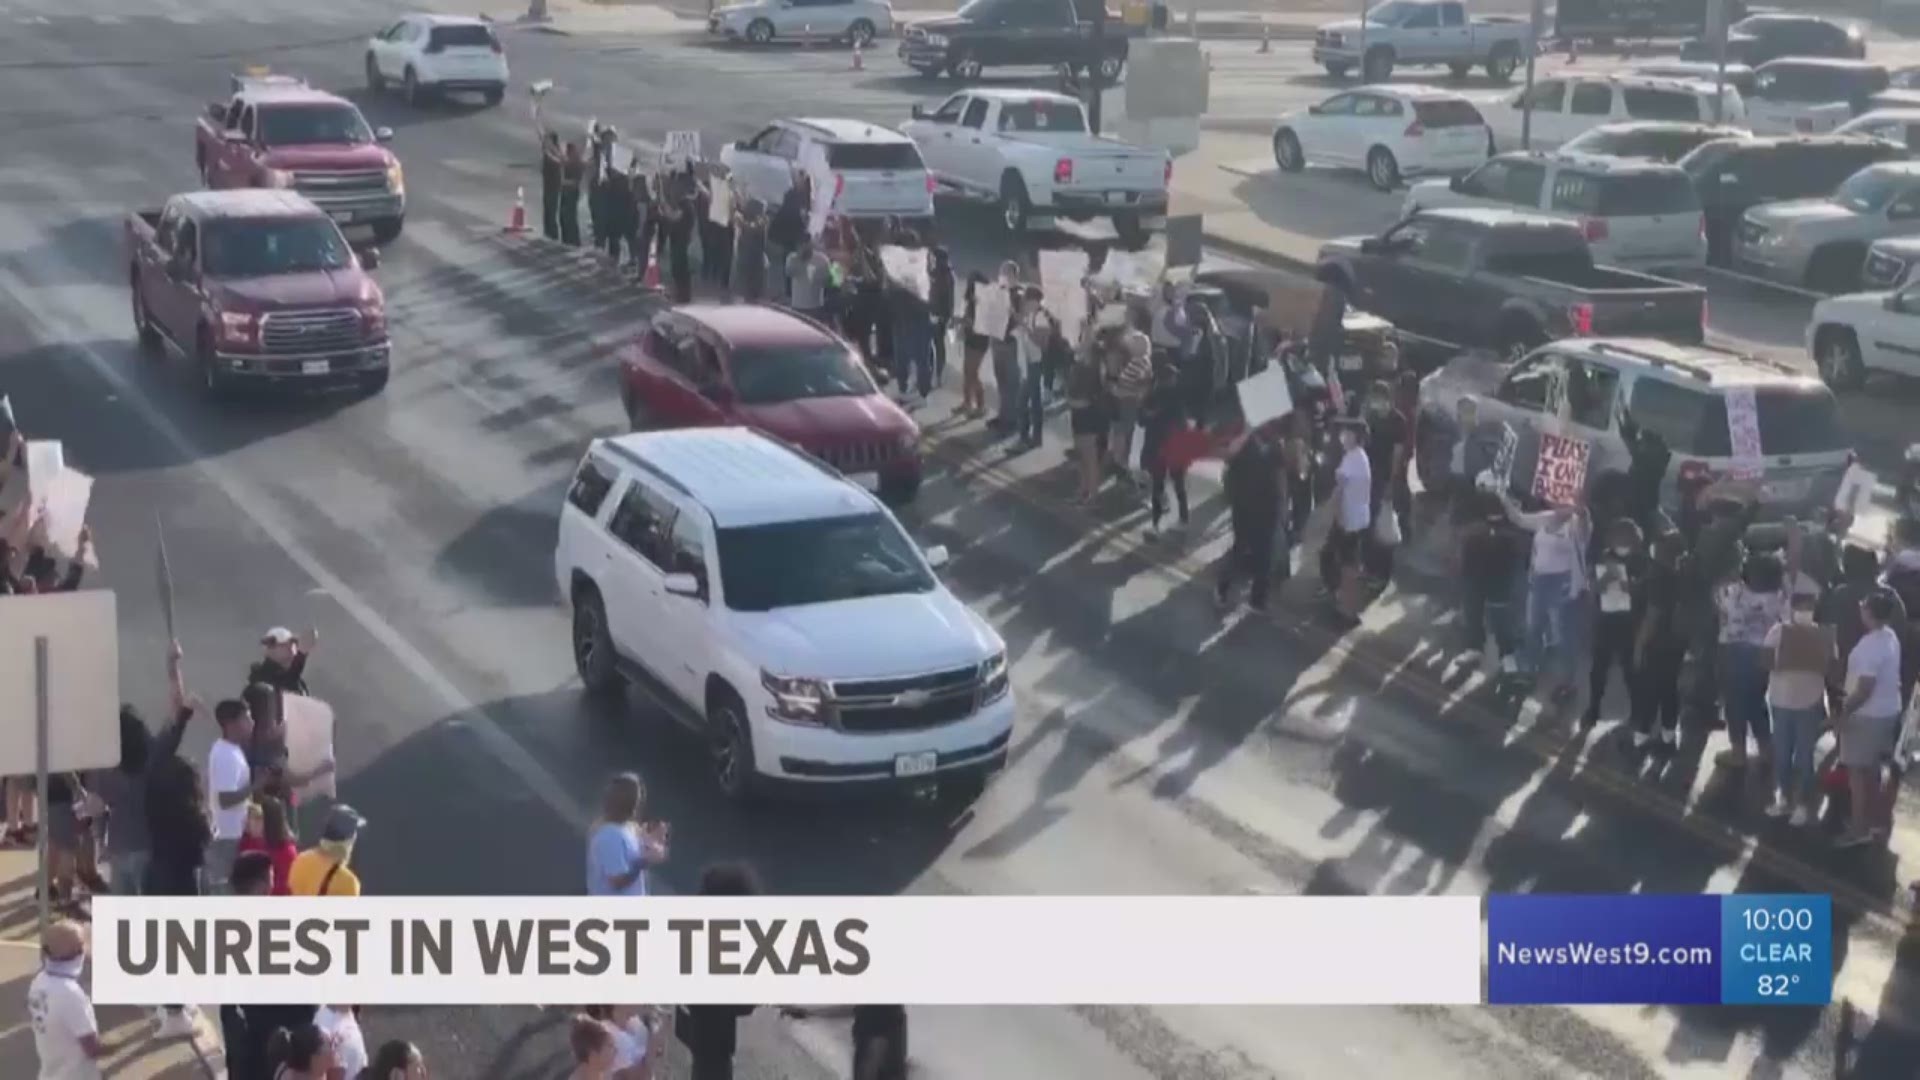 You've seen images of unrest across the country, now that frustration is being demonstrated in West Texas.